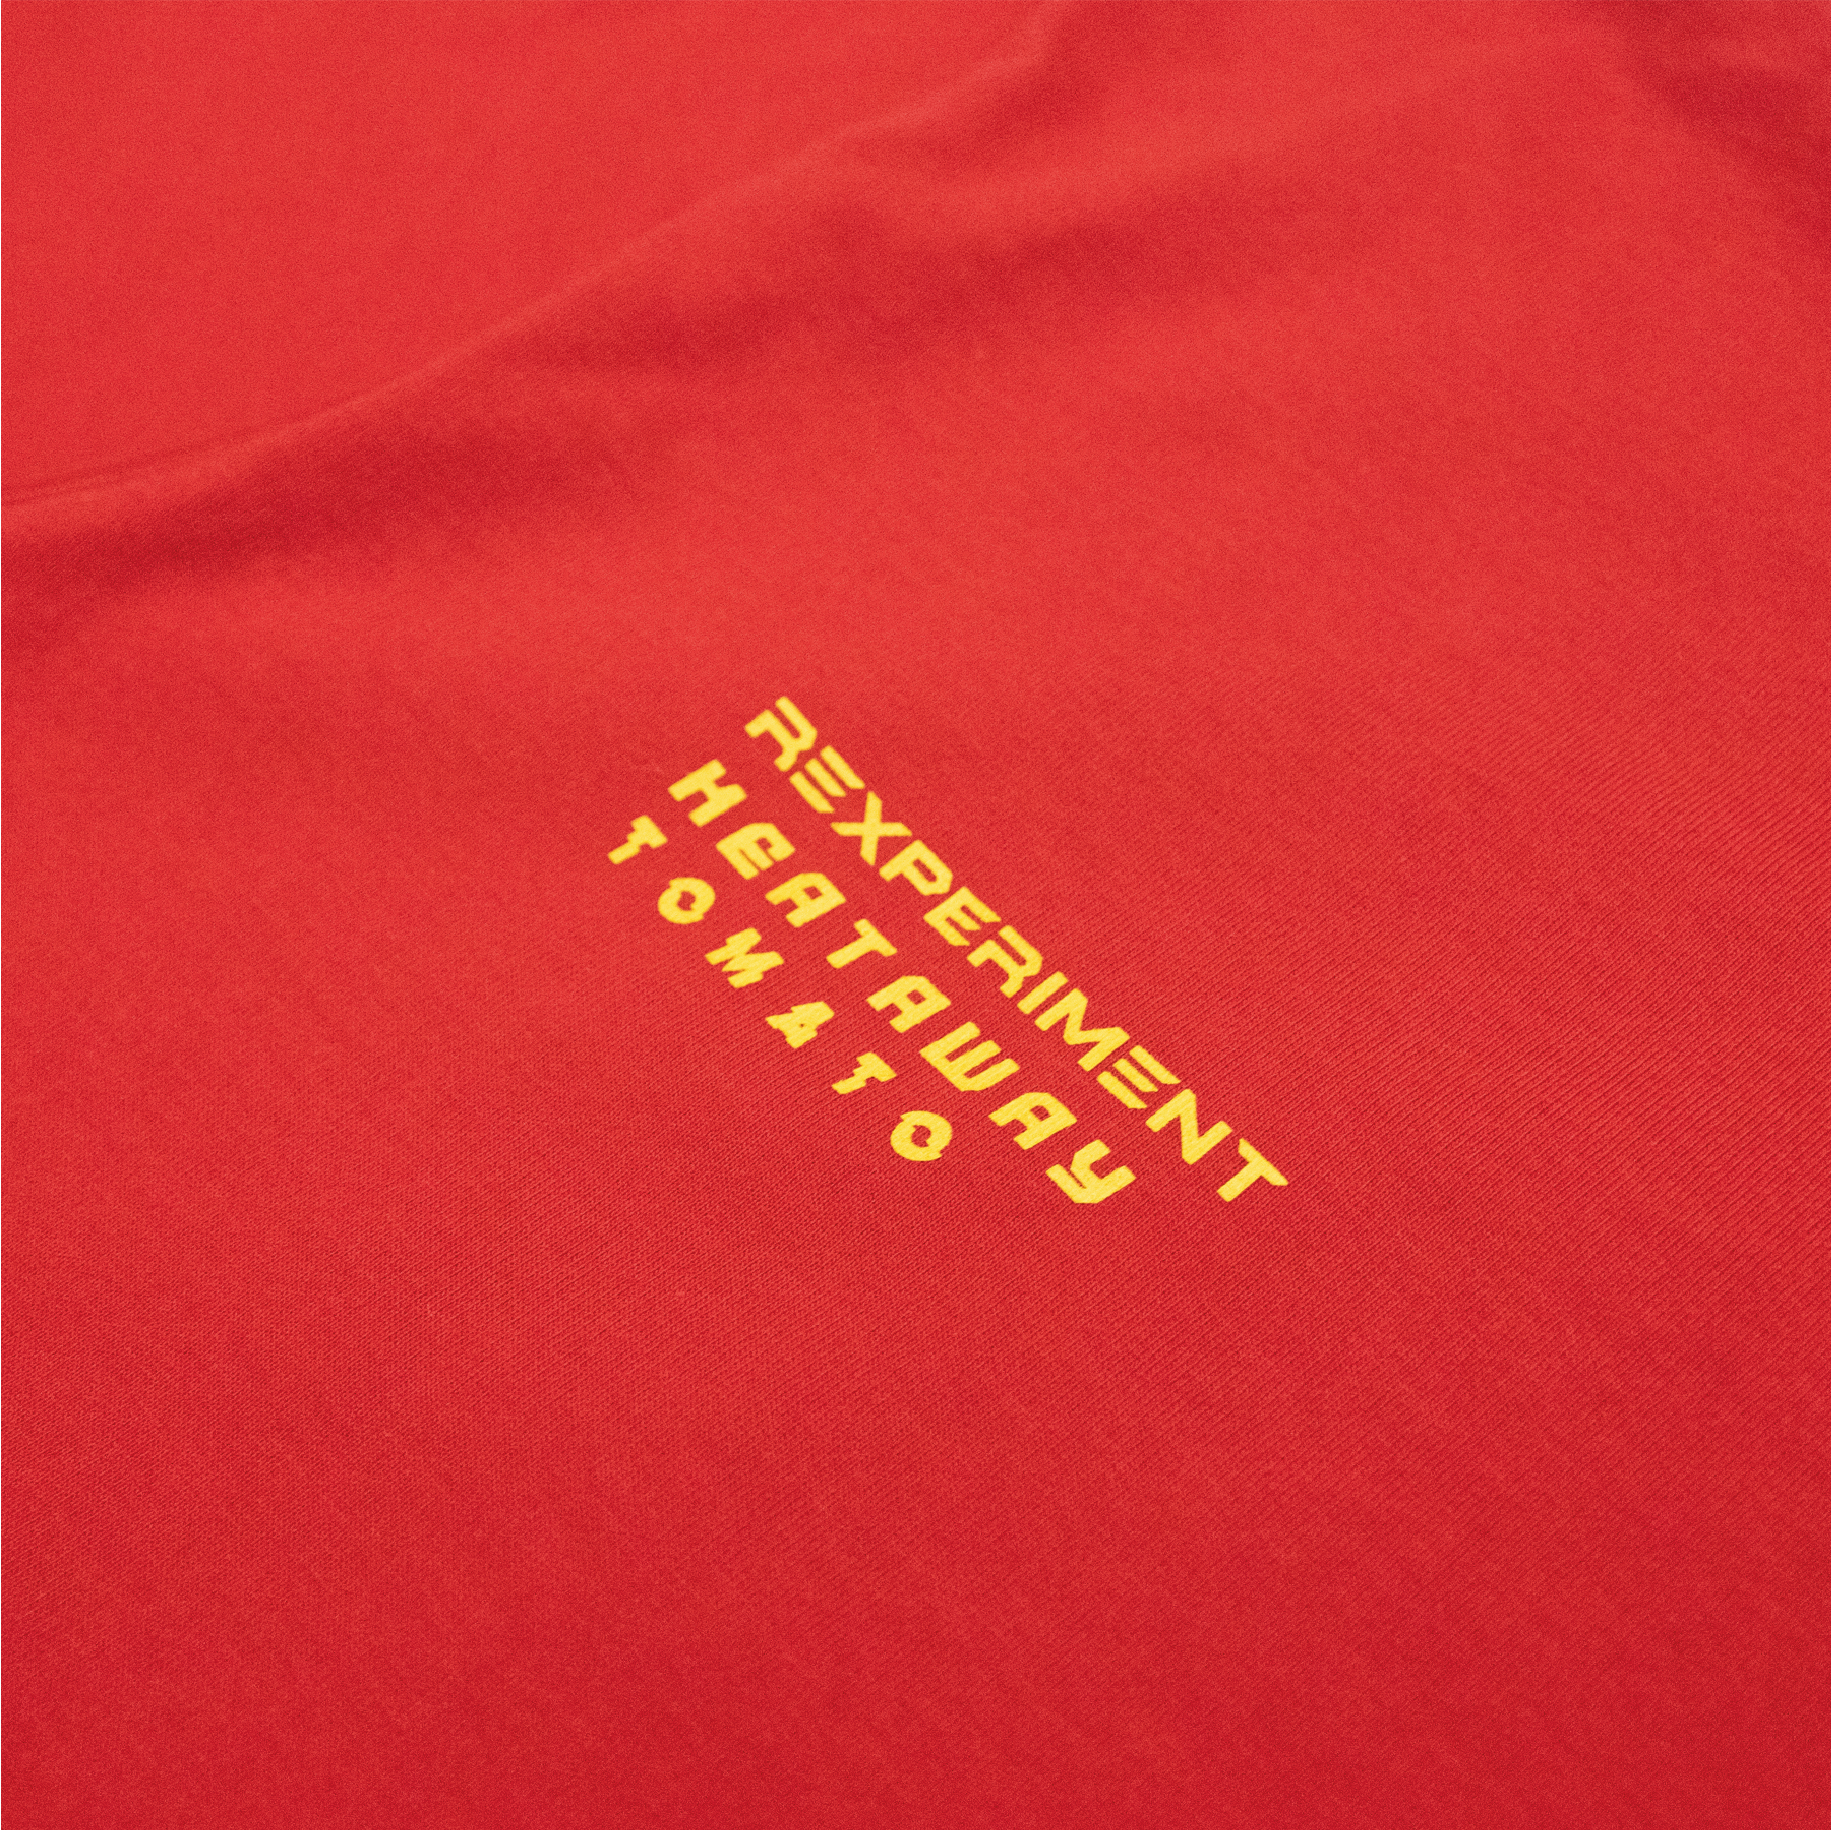 PROSPERITY TIGER - OVERSIZED TEE - RED